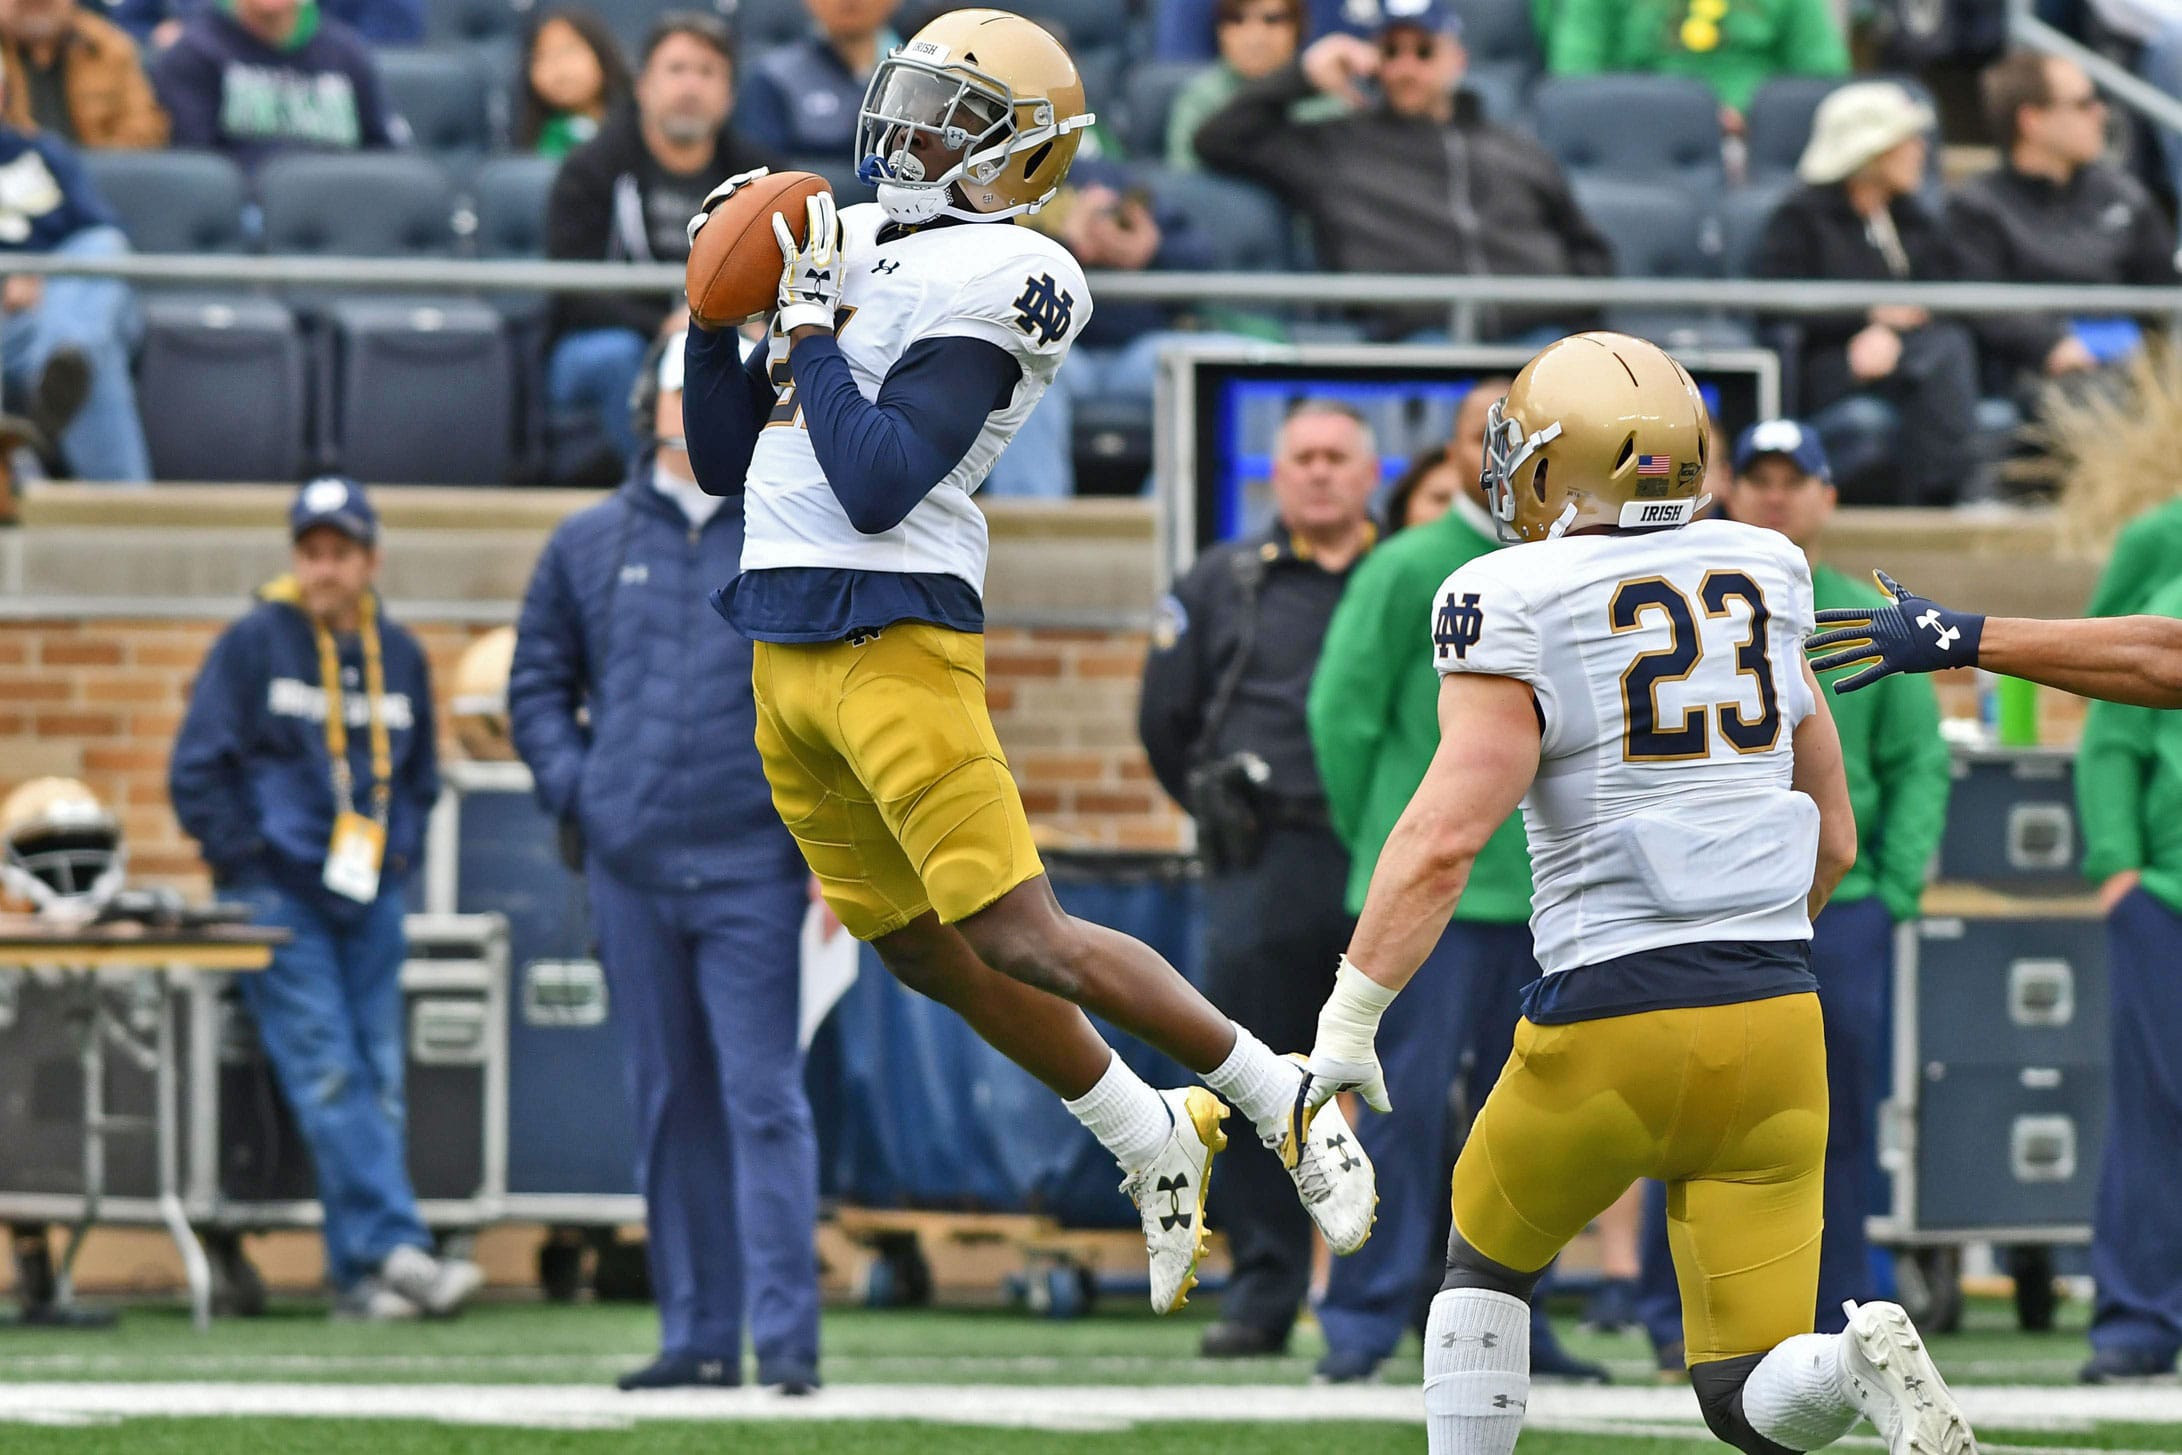 Notre Dame Football Fall Camp 2018: What To Watch For on Defense // UHND.com